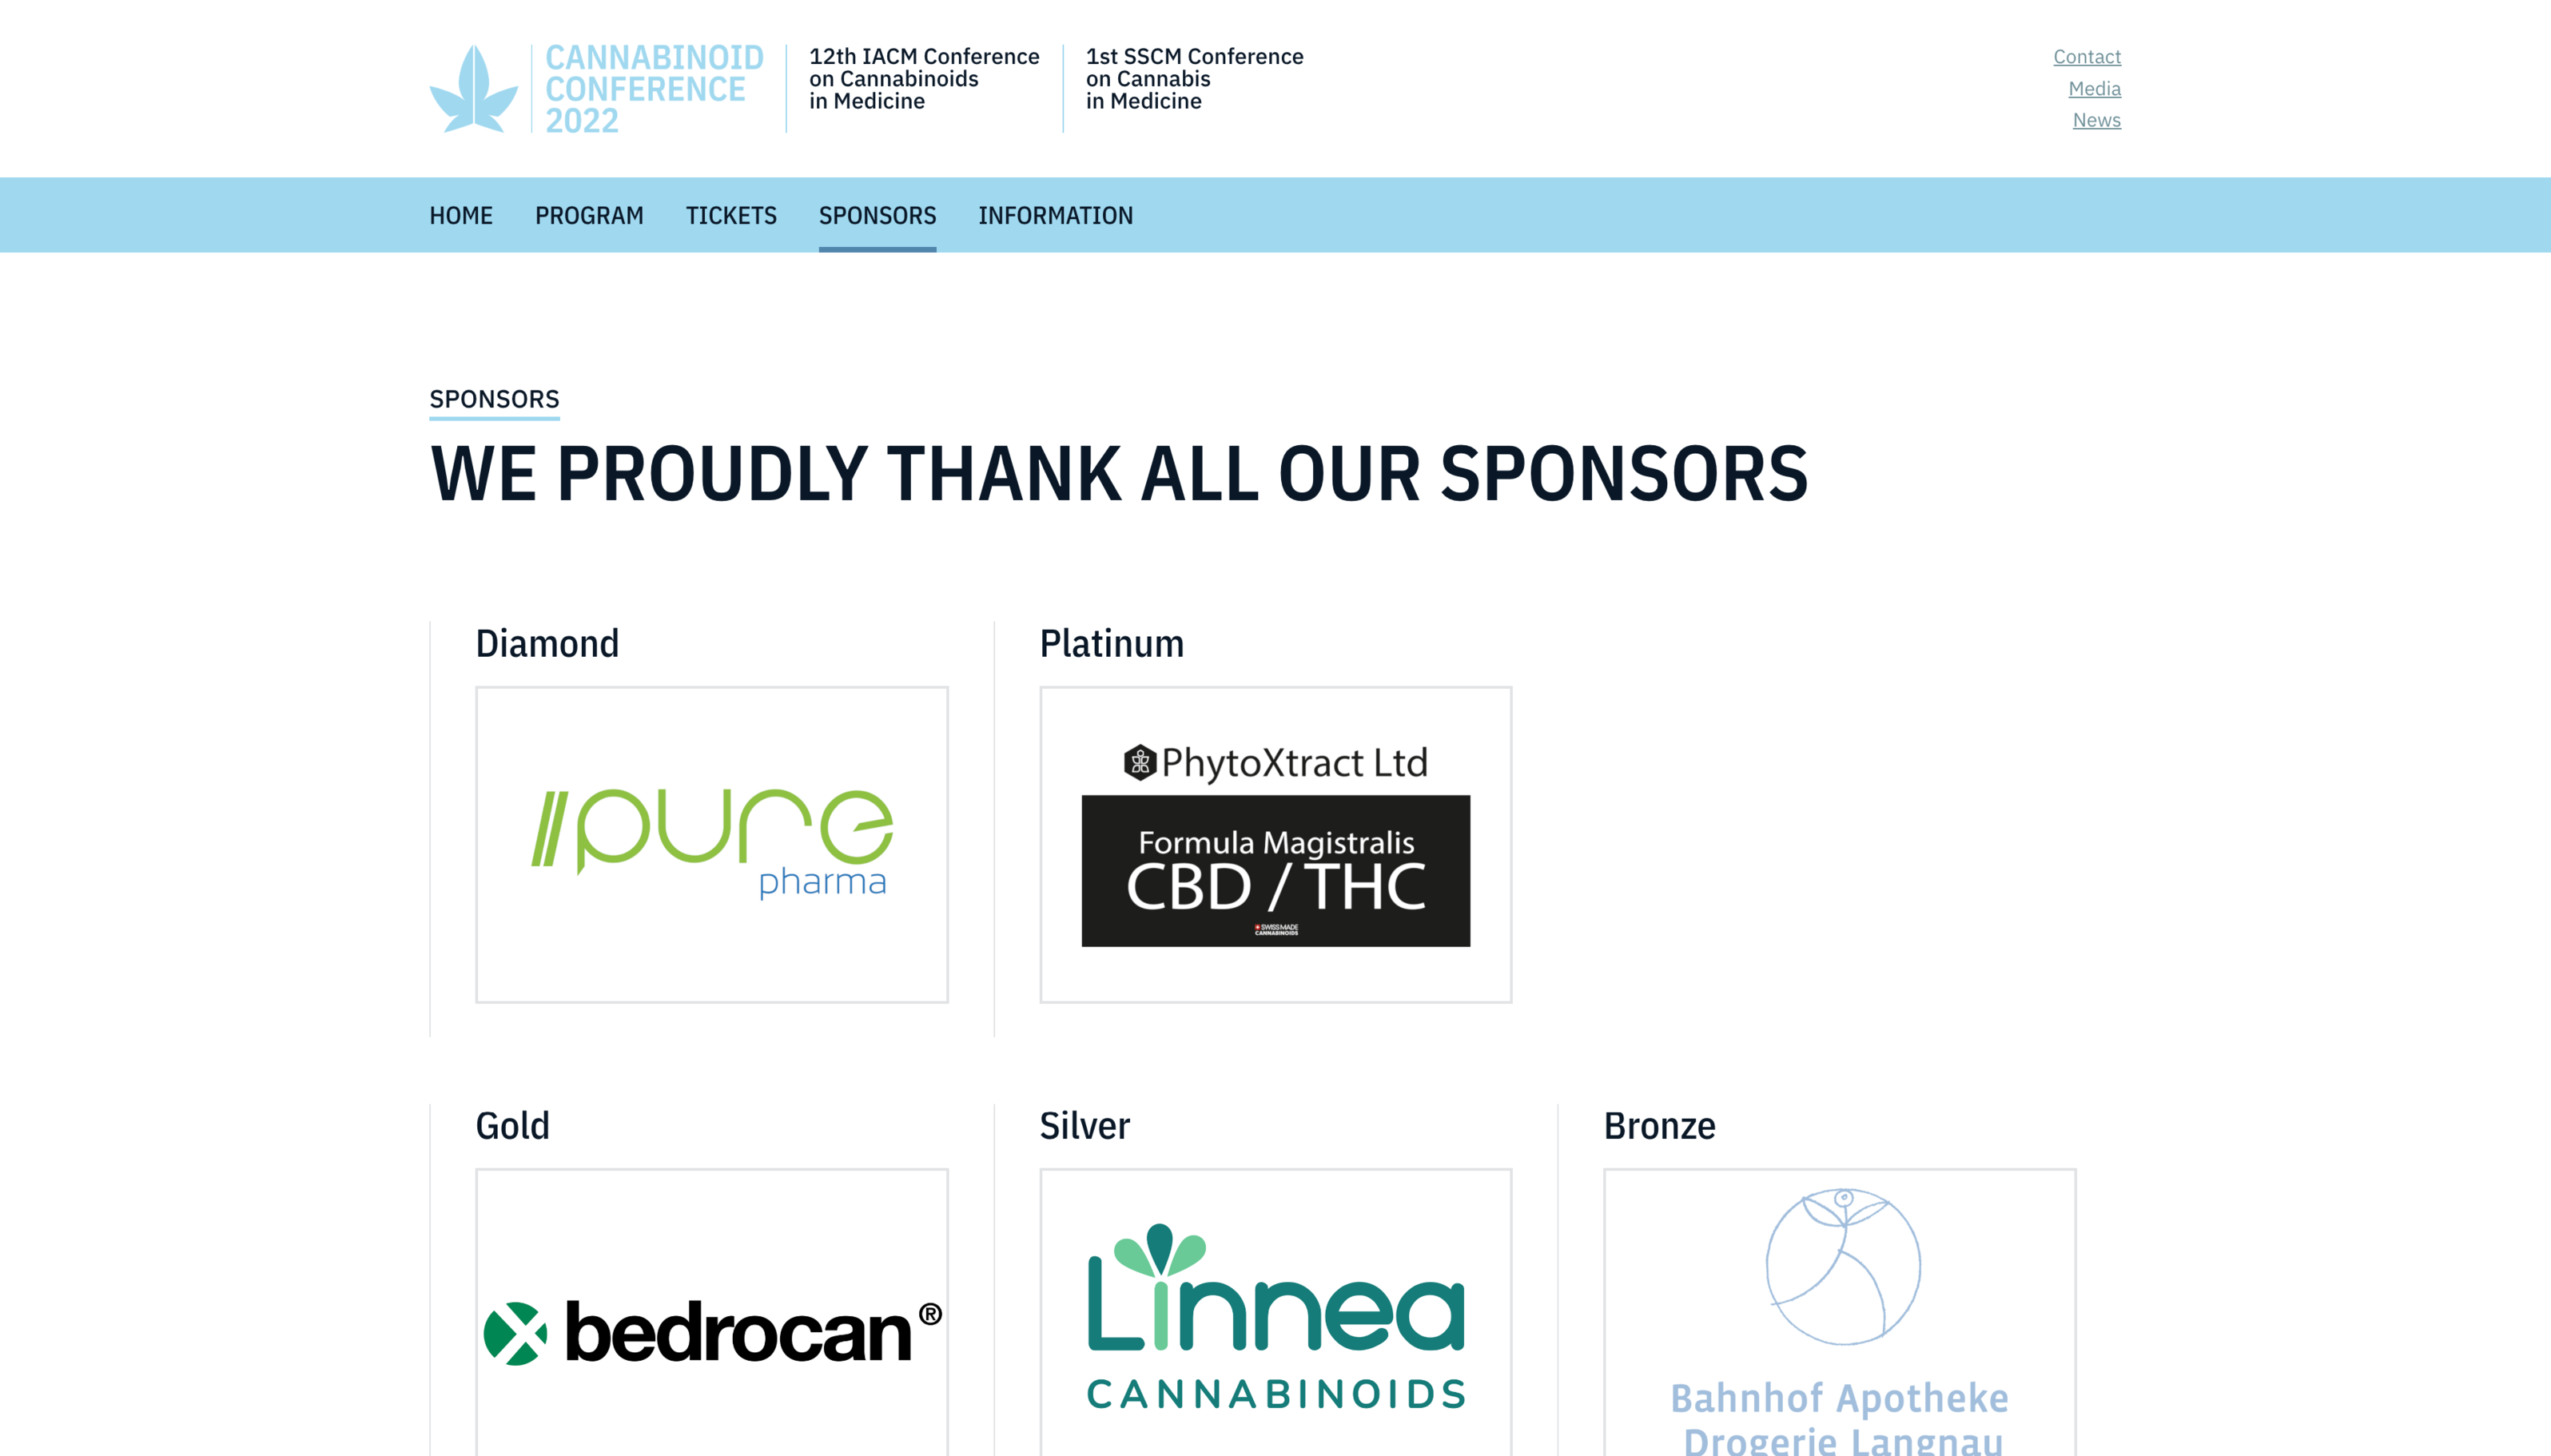 Sponsors - Cannabinoid Conference 2022